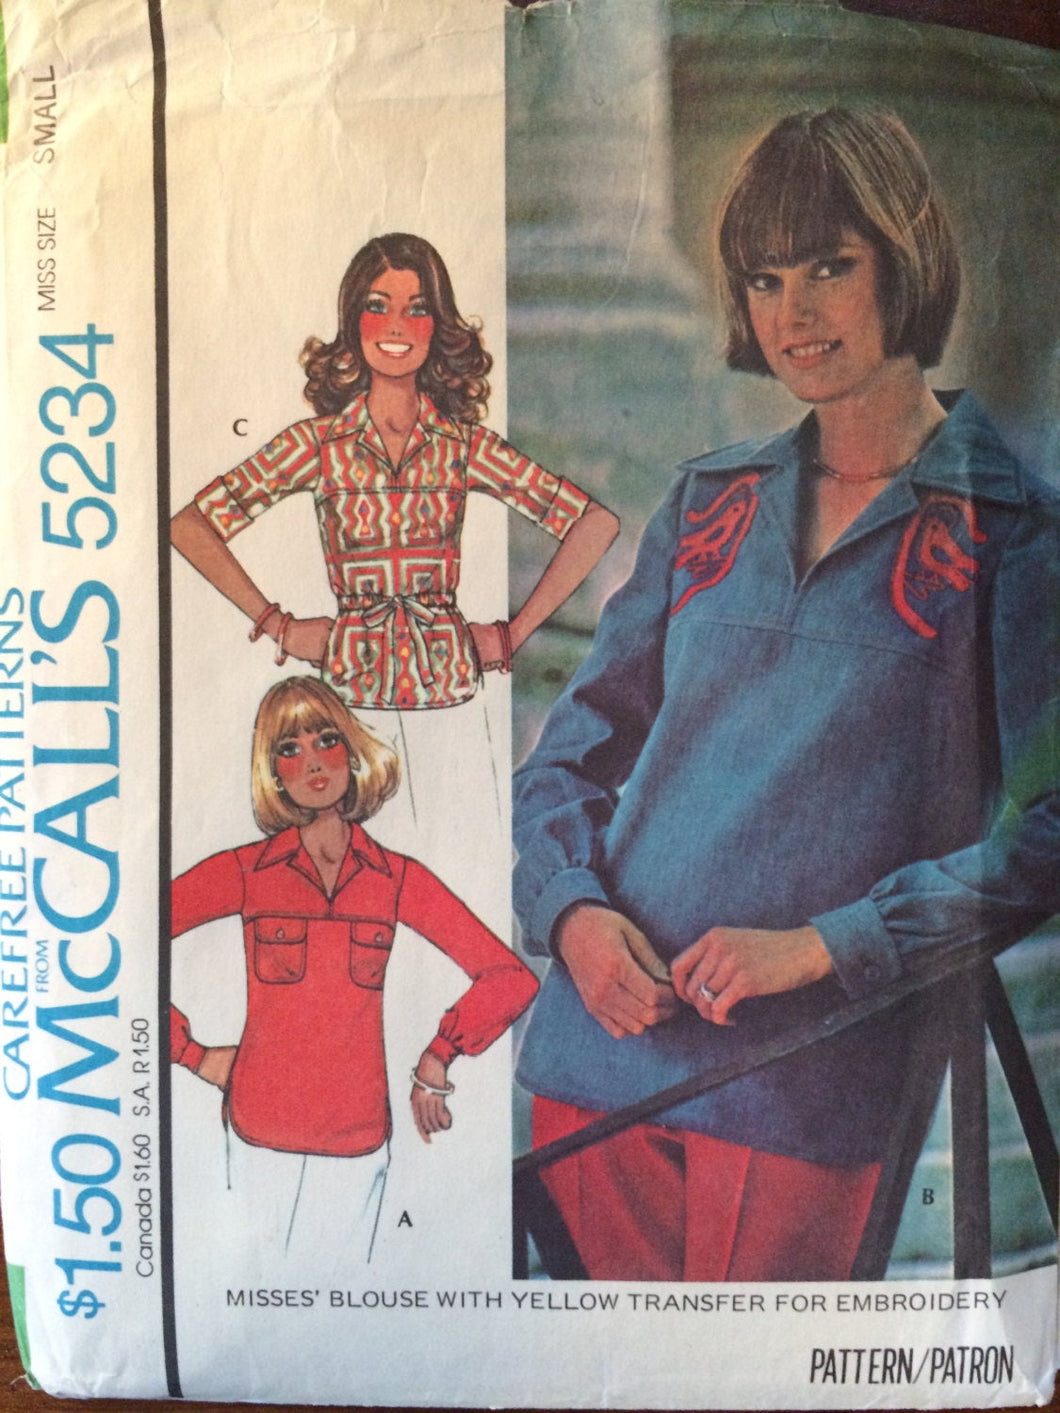 Blouse Pattern / Vintage Sewing Pattern / Embroidery Transfer / McCall's 5234 / Small Bust 32.5-34 / 1970s Pattern / Blouse Sewing